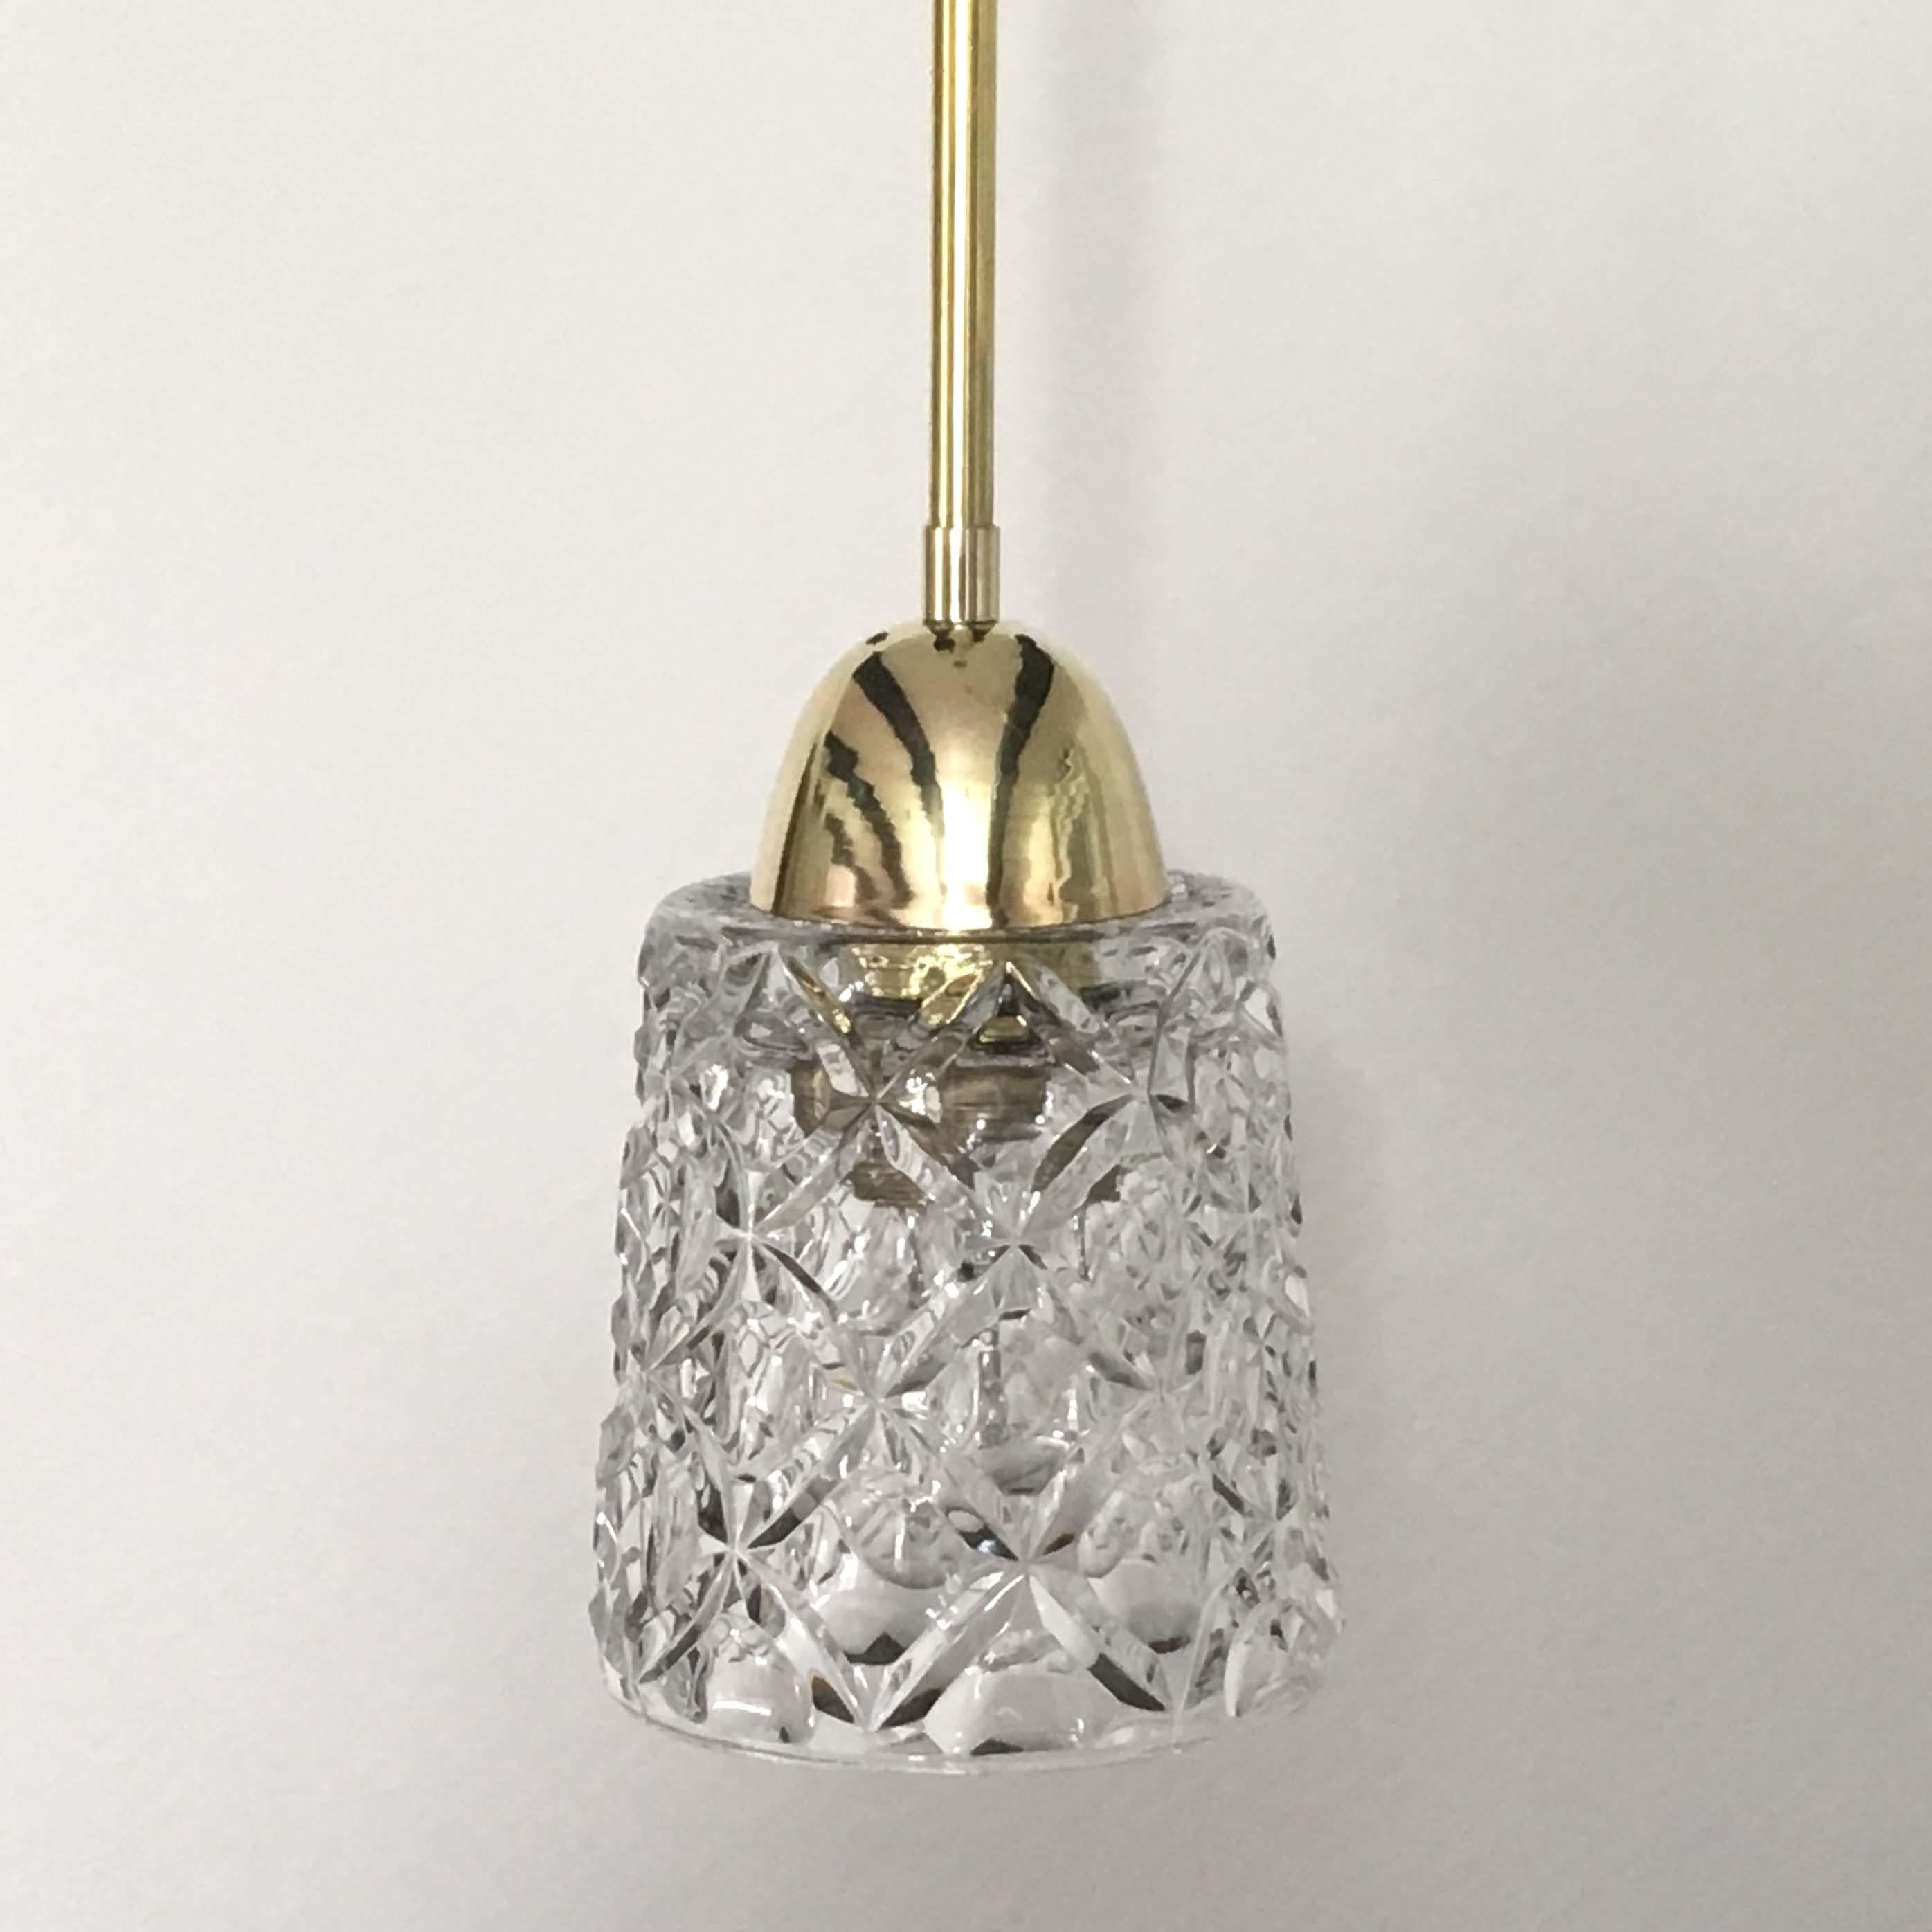 Mid-20th Century Mid-Century Modern Italian Brass and Crystal Cut Glass Pendant, 1950s For Sale